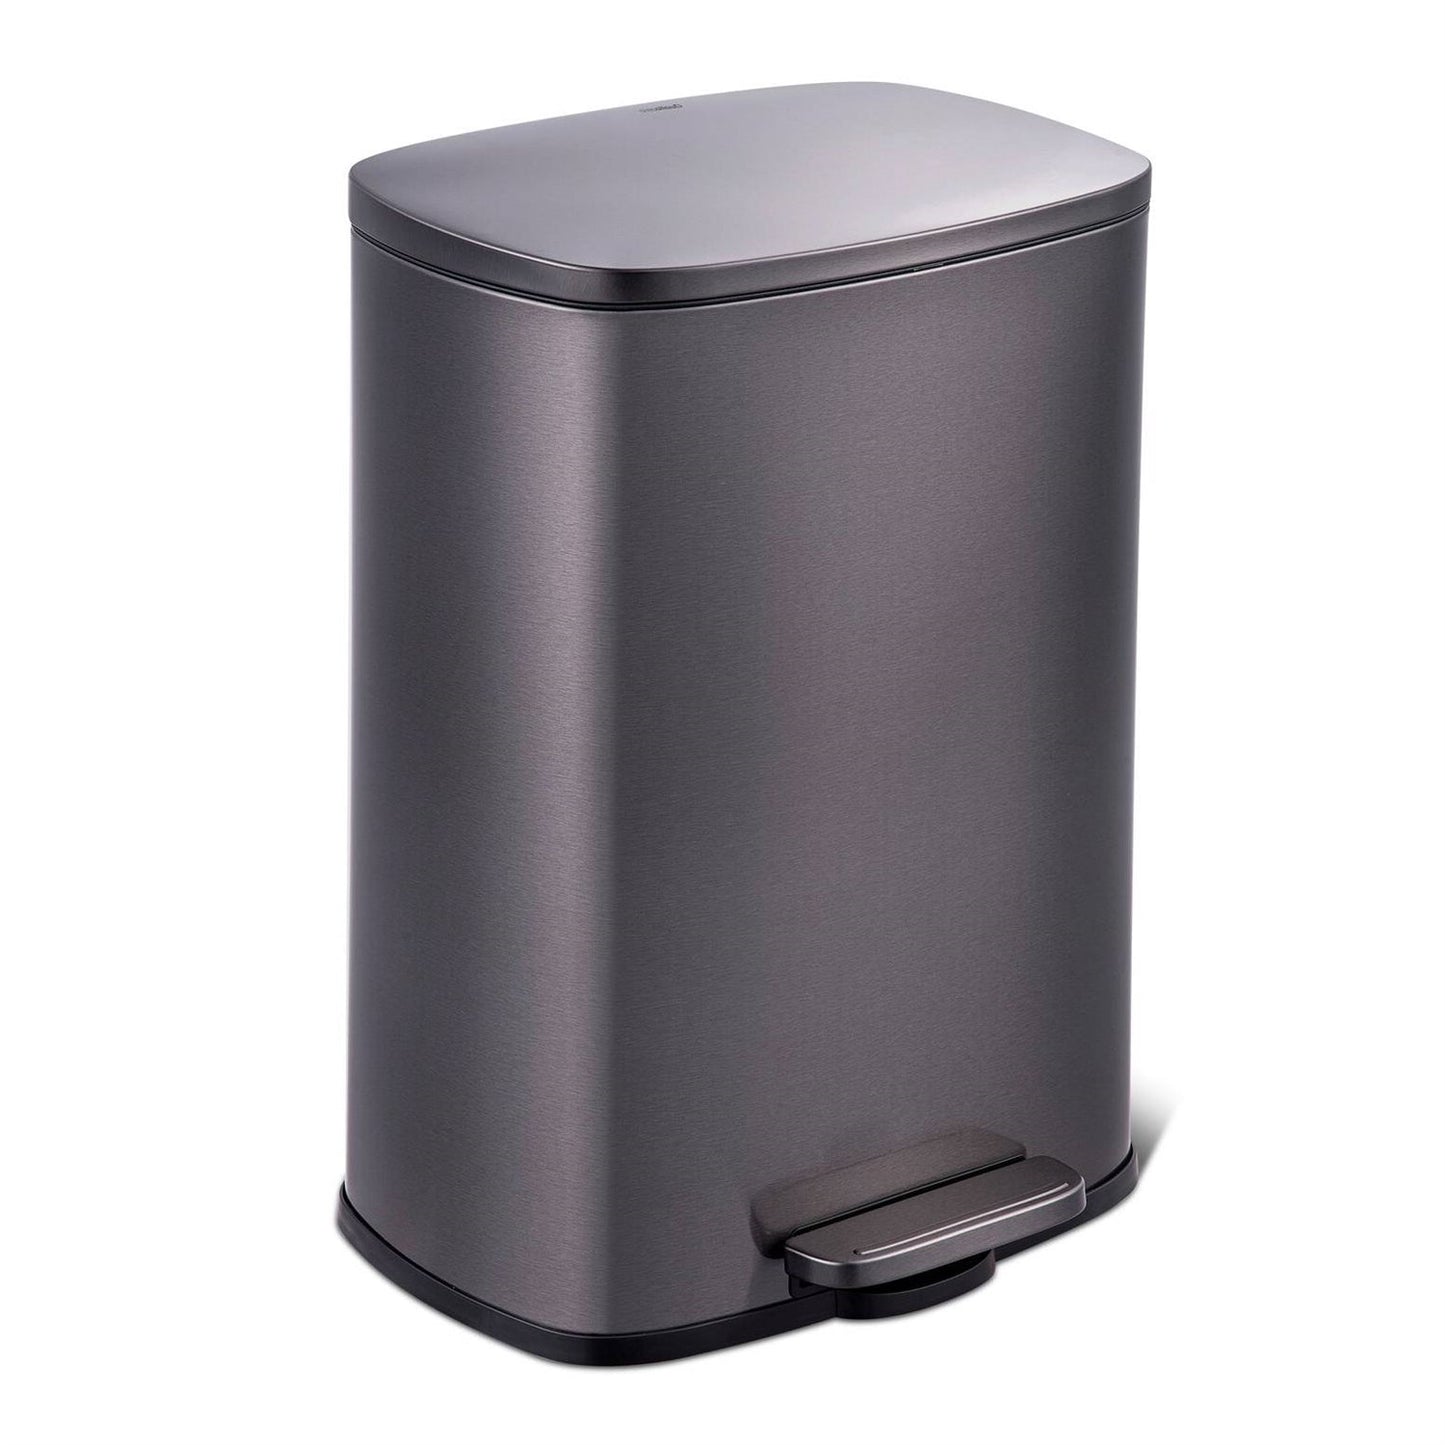 Kitchen > Trash Cans & Recycle Bins - 13 Gallon Black Stainless Steel Kitchen Trash Can With Step Open Lid